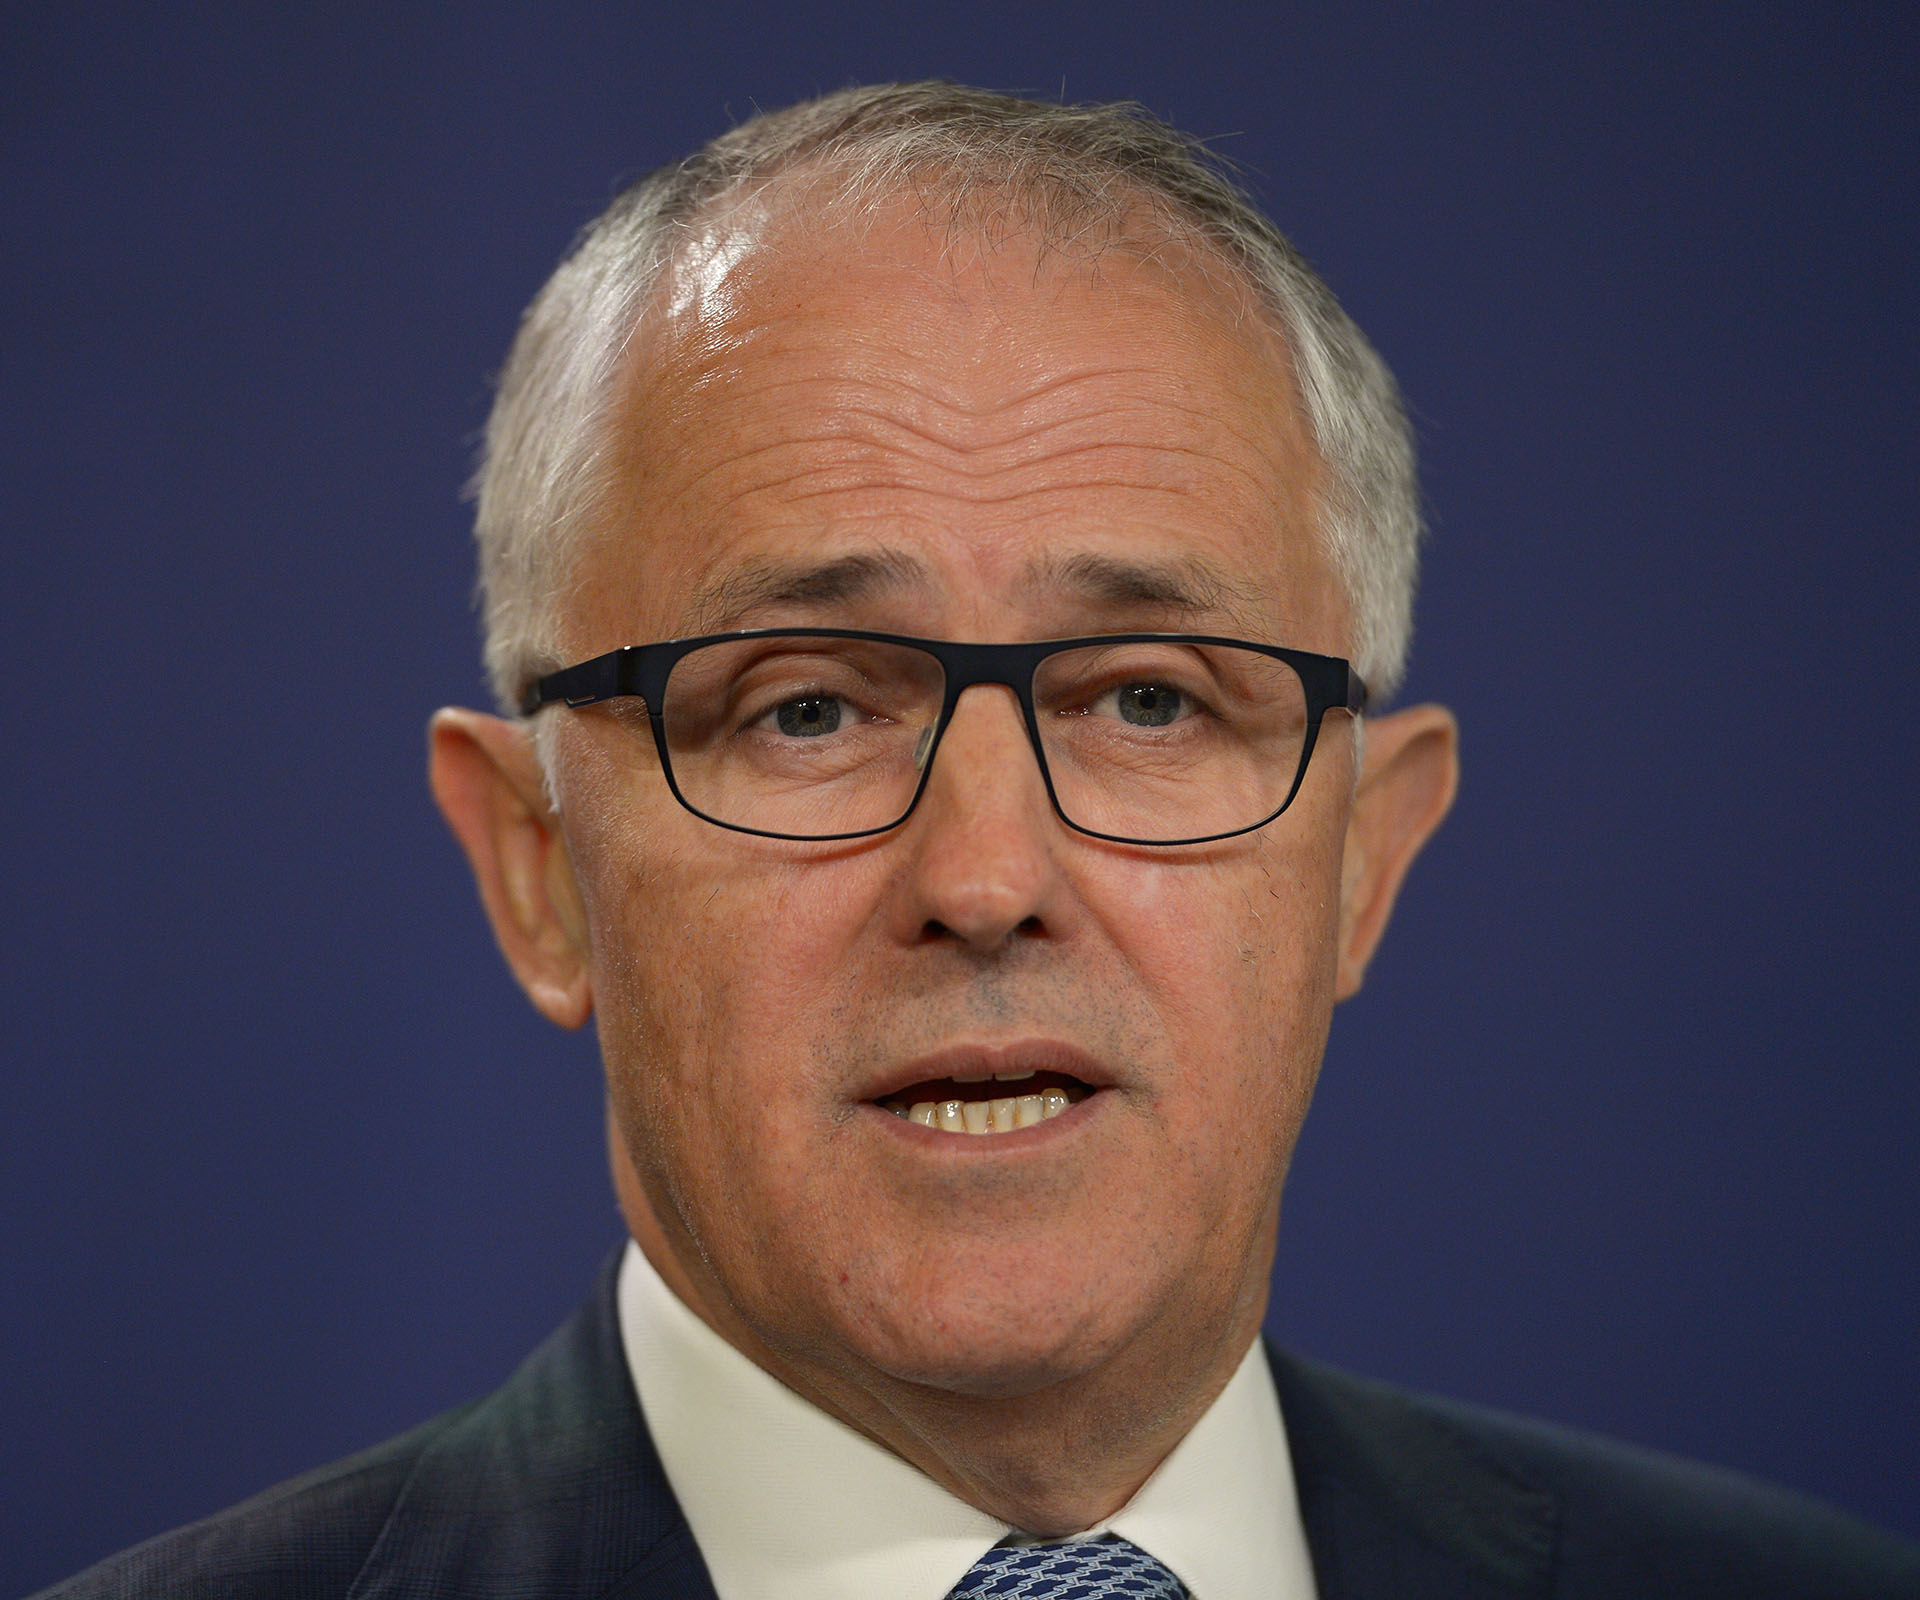 BREAKING: Malcolm Turnbull confirms leadership challenge for PM